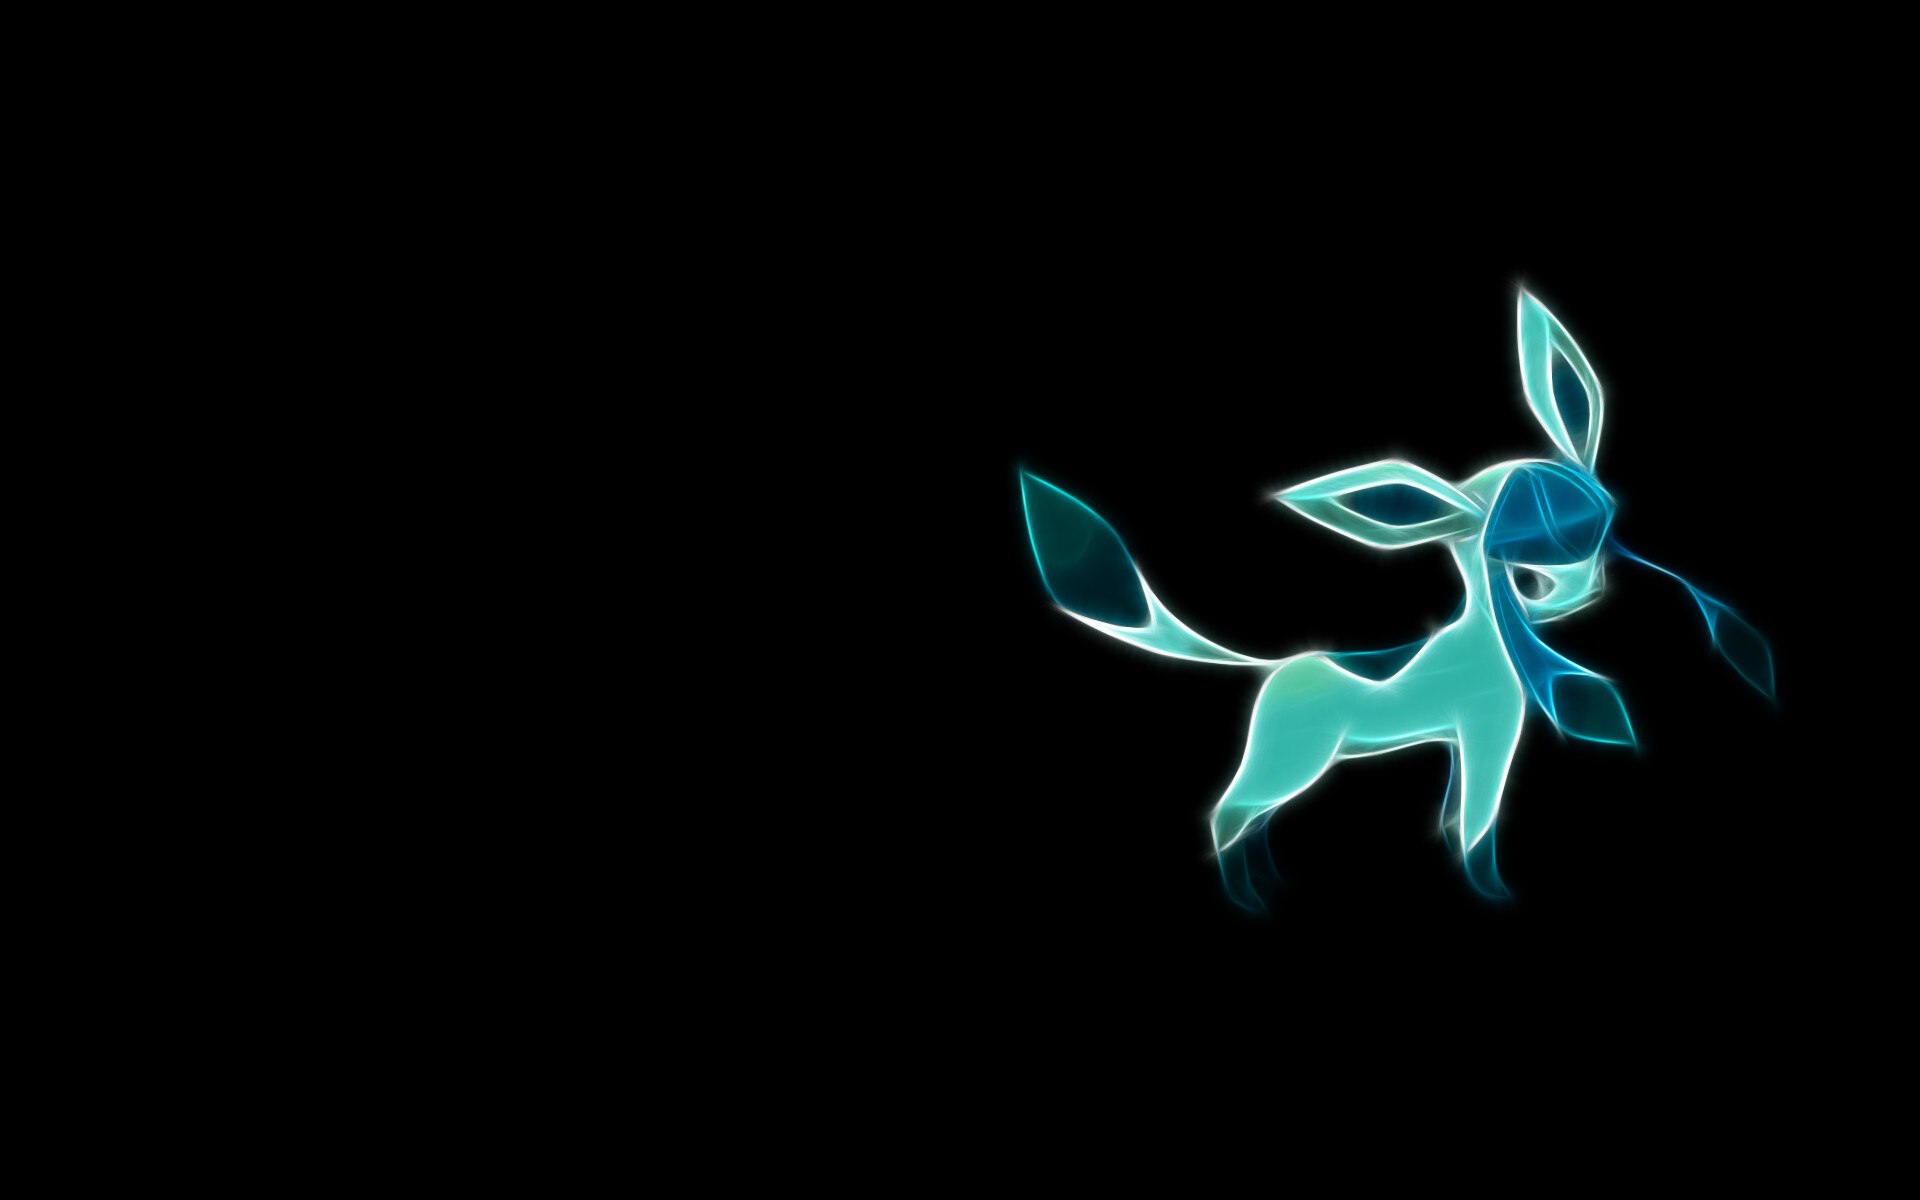 Glaceon: Creature resembling an Arctic animal, A light-blue fur, Icy breath. 1920x1200 HD Wallpaper.